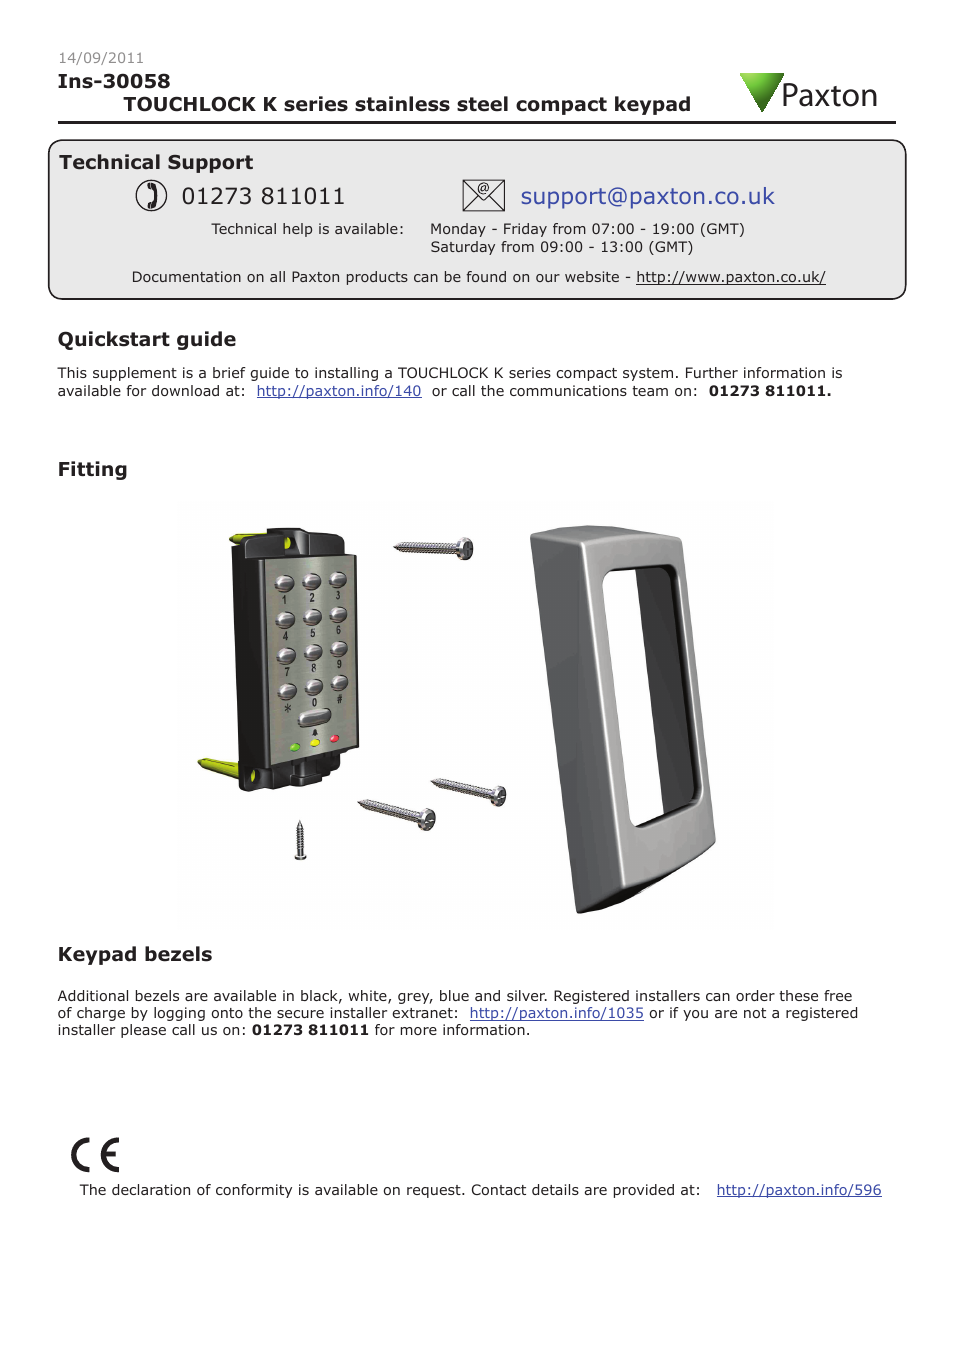 TOUCHLOCK K series stainless steel compact keypad